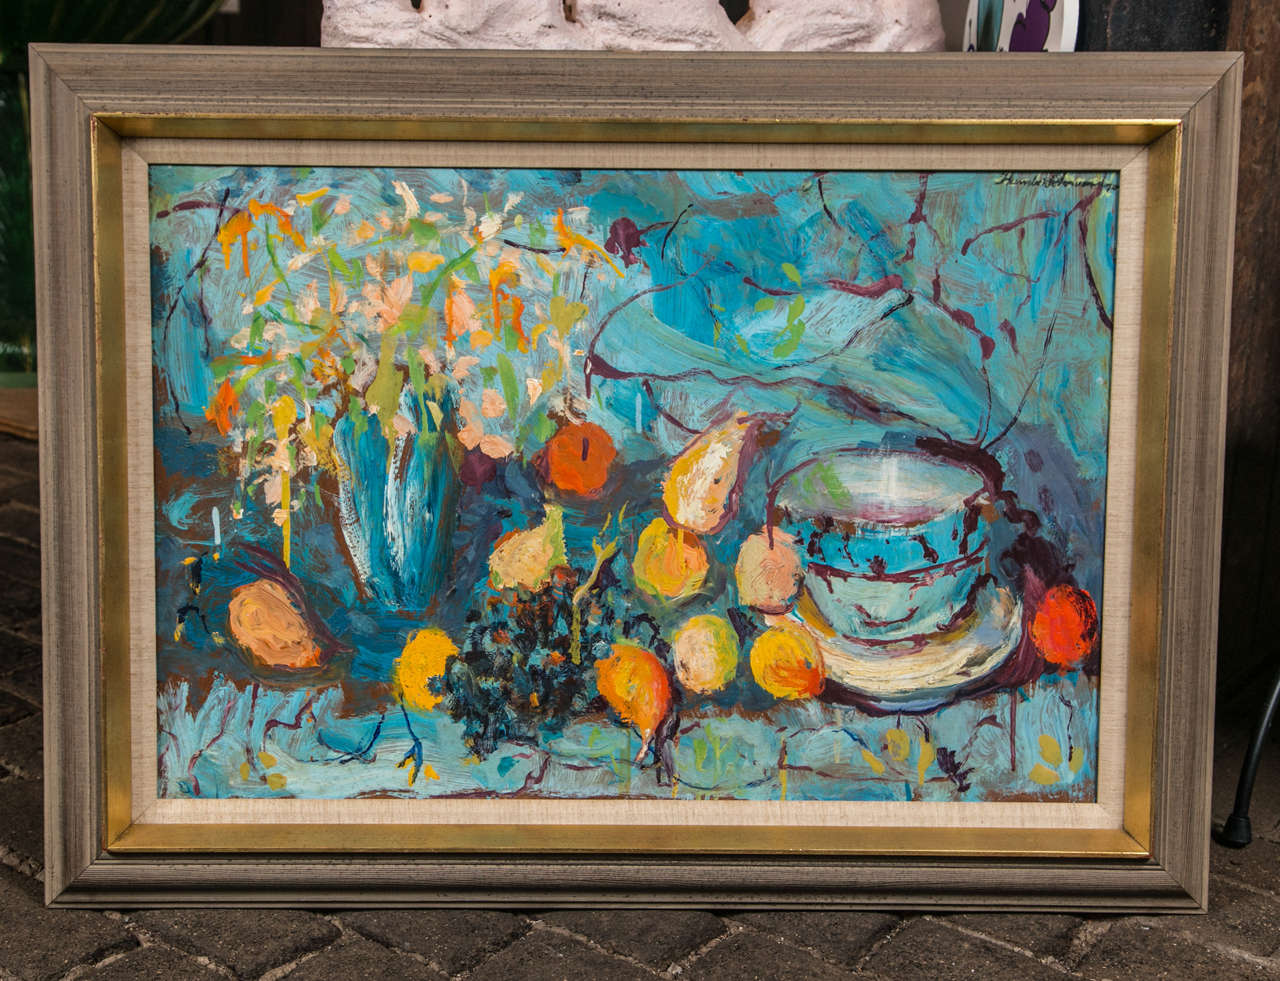 1970s still life painting by African-American painter, Humbert Howard (1905-1990). Original framing chosen by Howard. Dimensions of the painting in the frame are 31